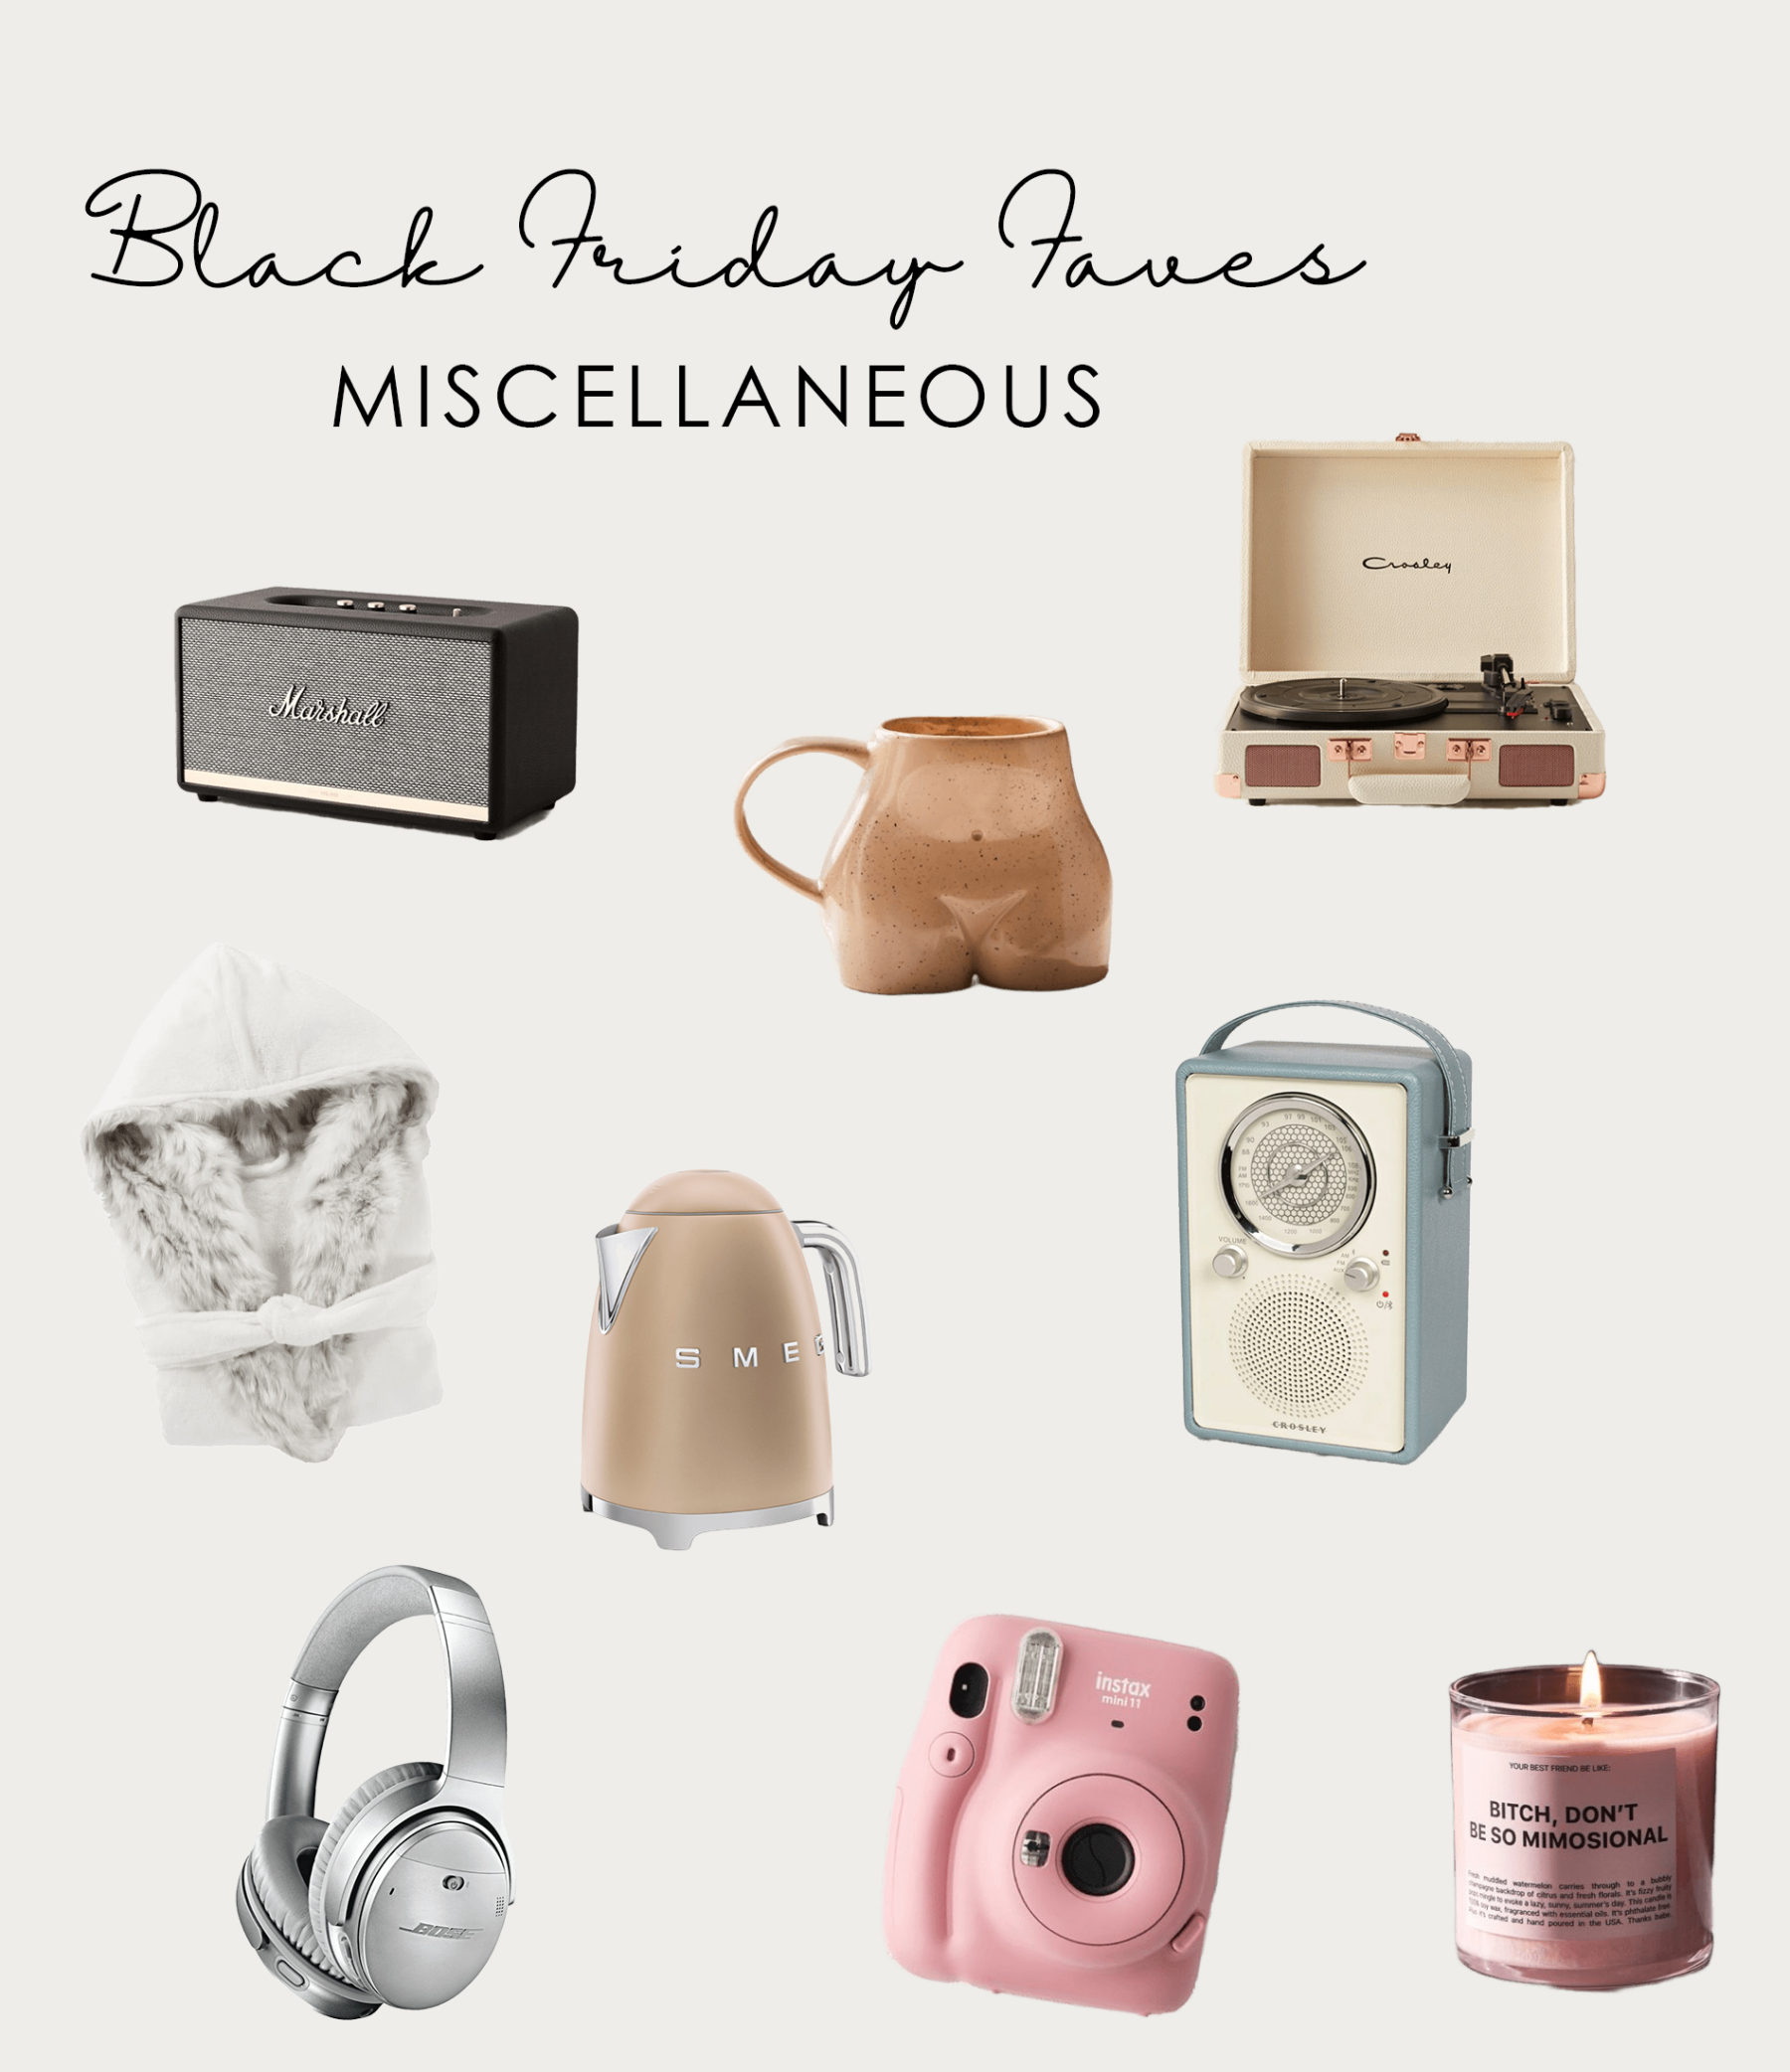 Black Friday Miscellaneous | Black Friday Deals | Gift Guide